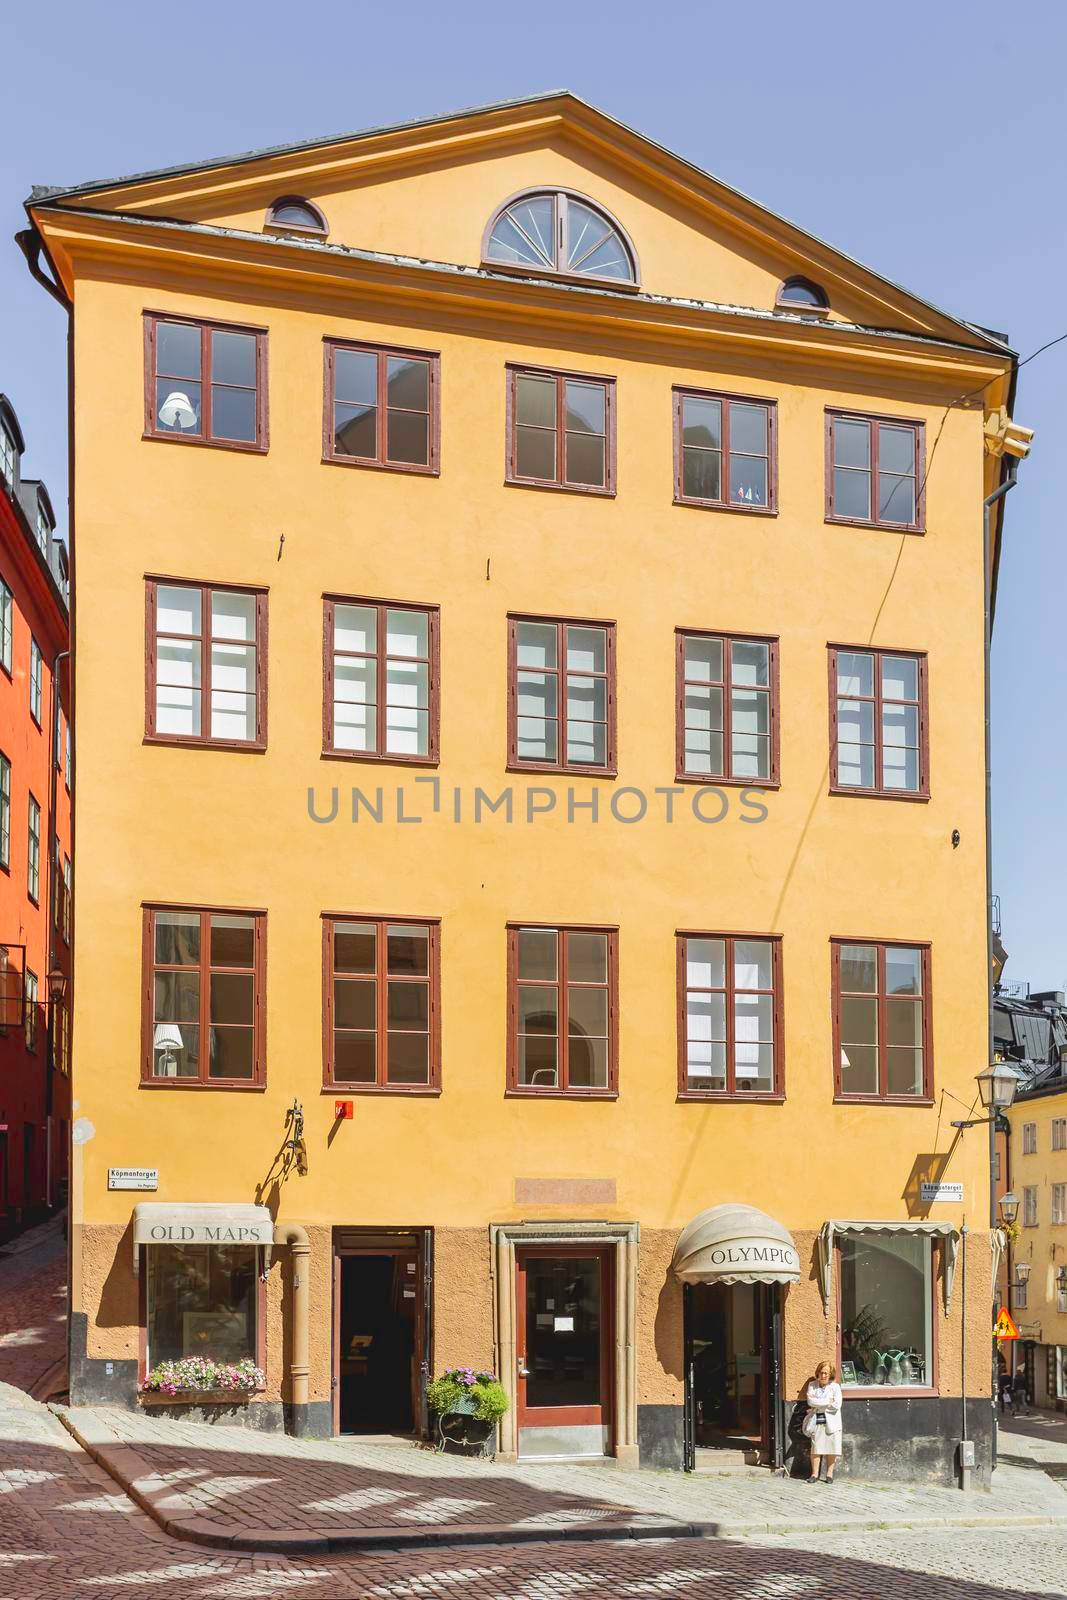 STOCKHOLM, SWEDEN - July 06, 2017. Shop with old maps with open doors. Sun reflections on bright yellow walls in Gamla stan. Colorful old fashioned buildings in historical part of town. by aksenovko